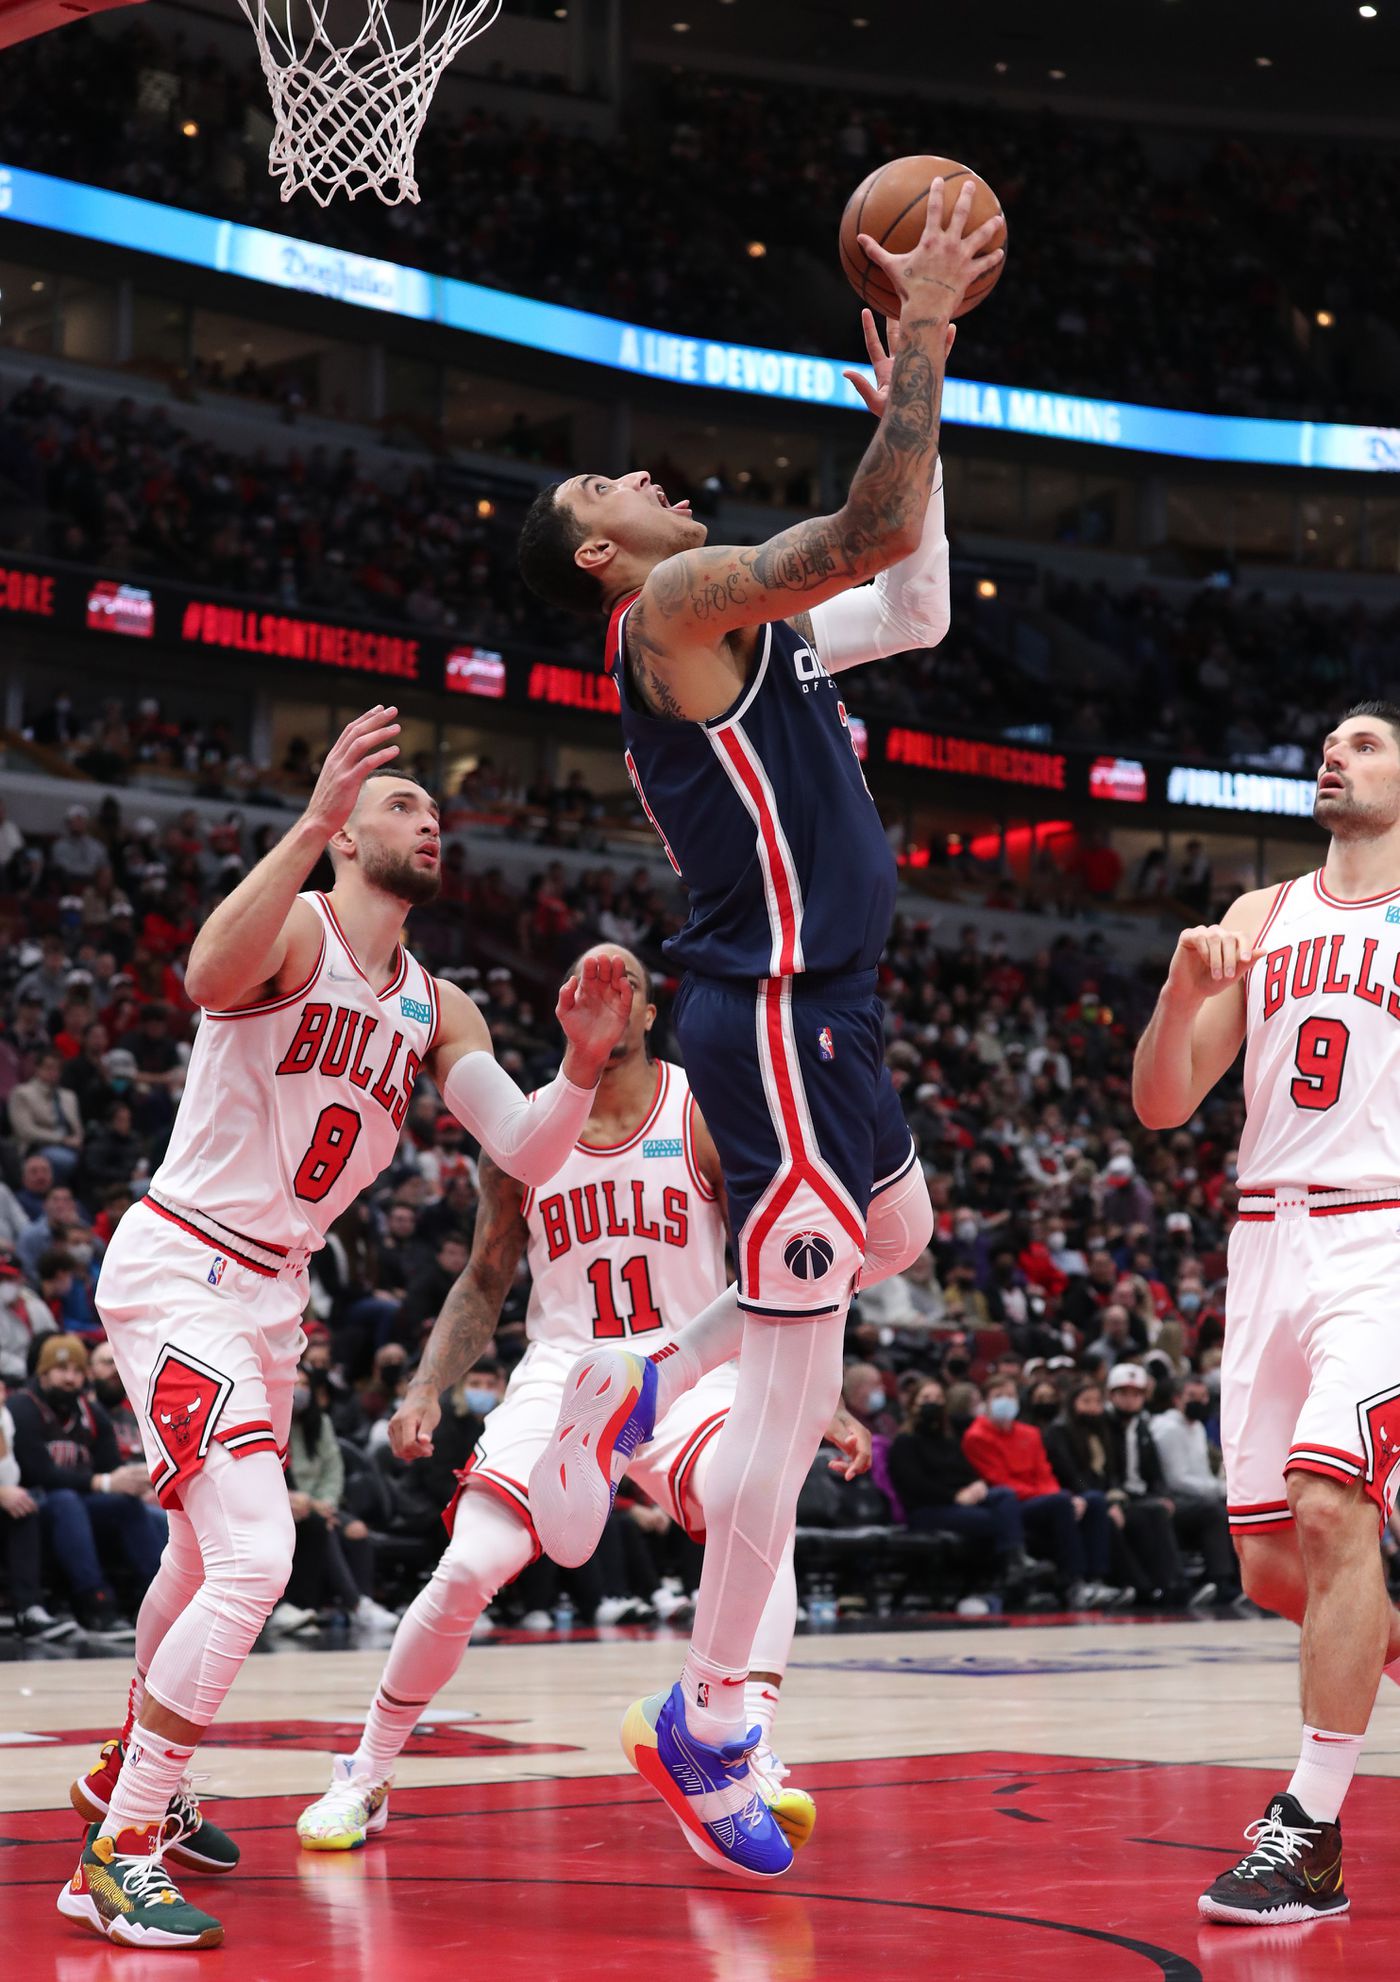 Washington Wizards forward Kyle Kuzma (33) makes a reverse layup and draws a foul in the third quarter against the Chicago Bulls at United Center on Jan. 7, 2022, in Chicago.